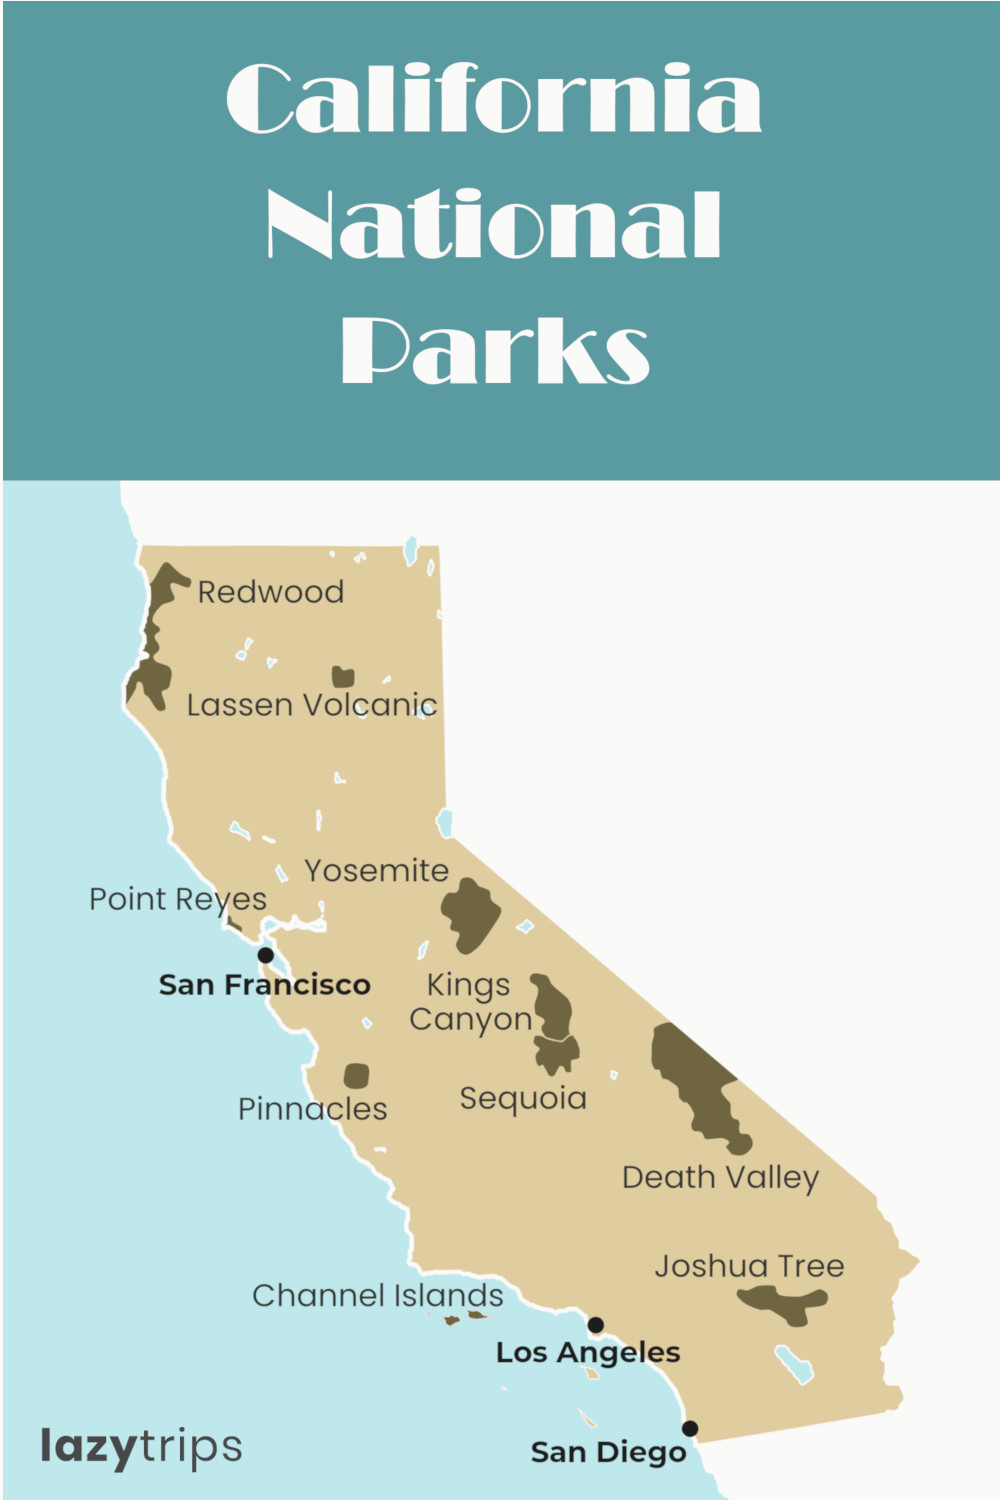 California National Parks - the complete guide with details, map and key information